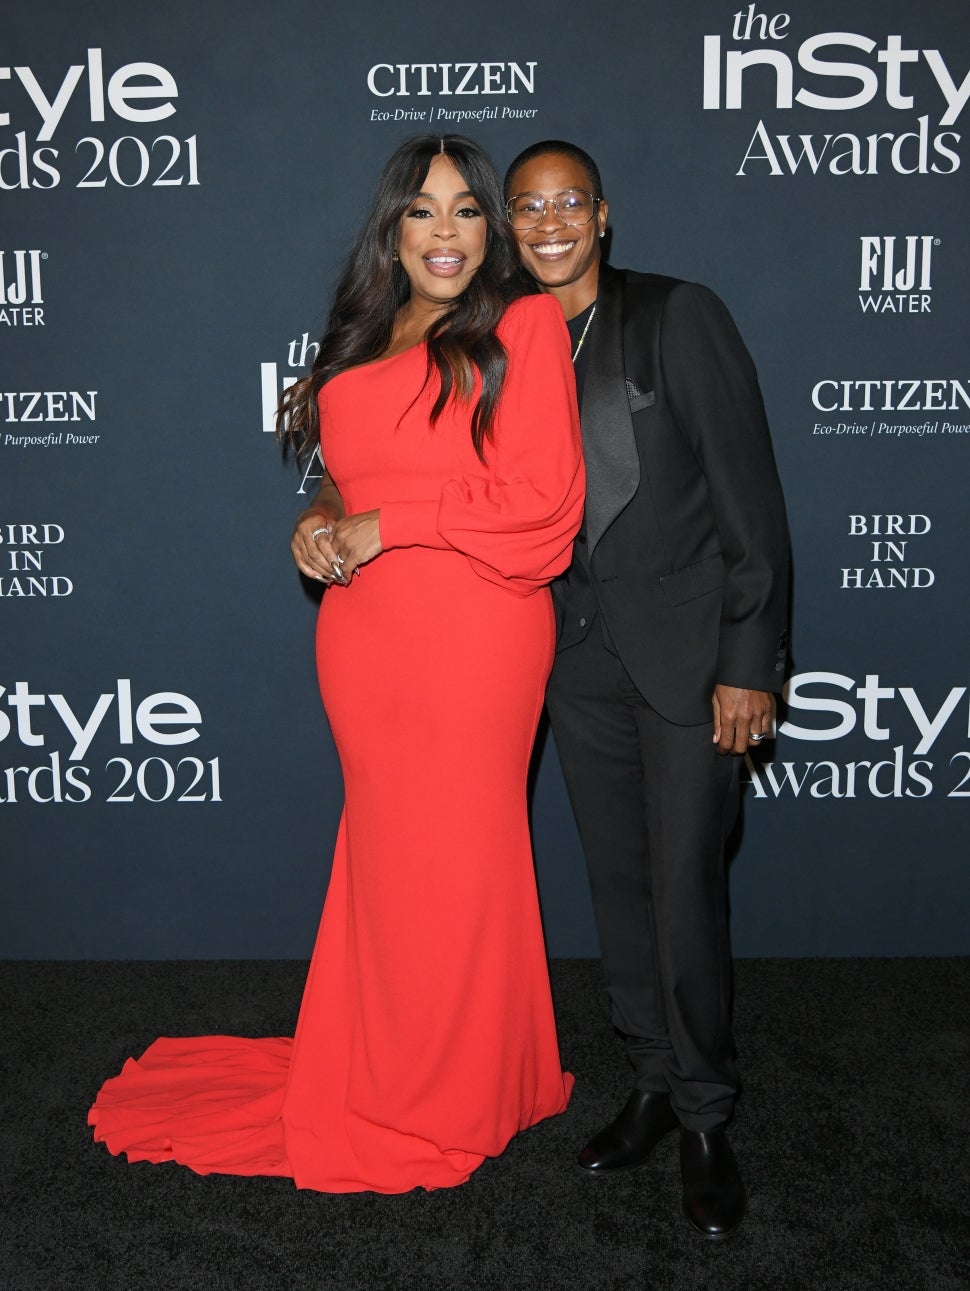 Niecy Nash and Jessica Betts attend the 6th Annual InStyle Awards